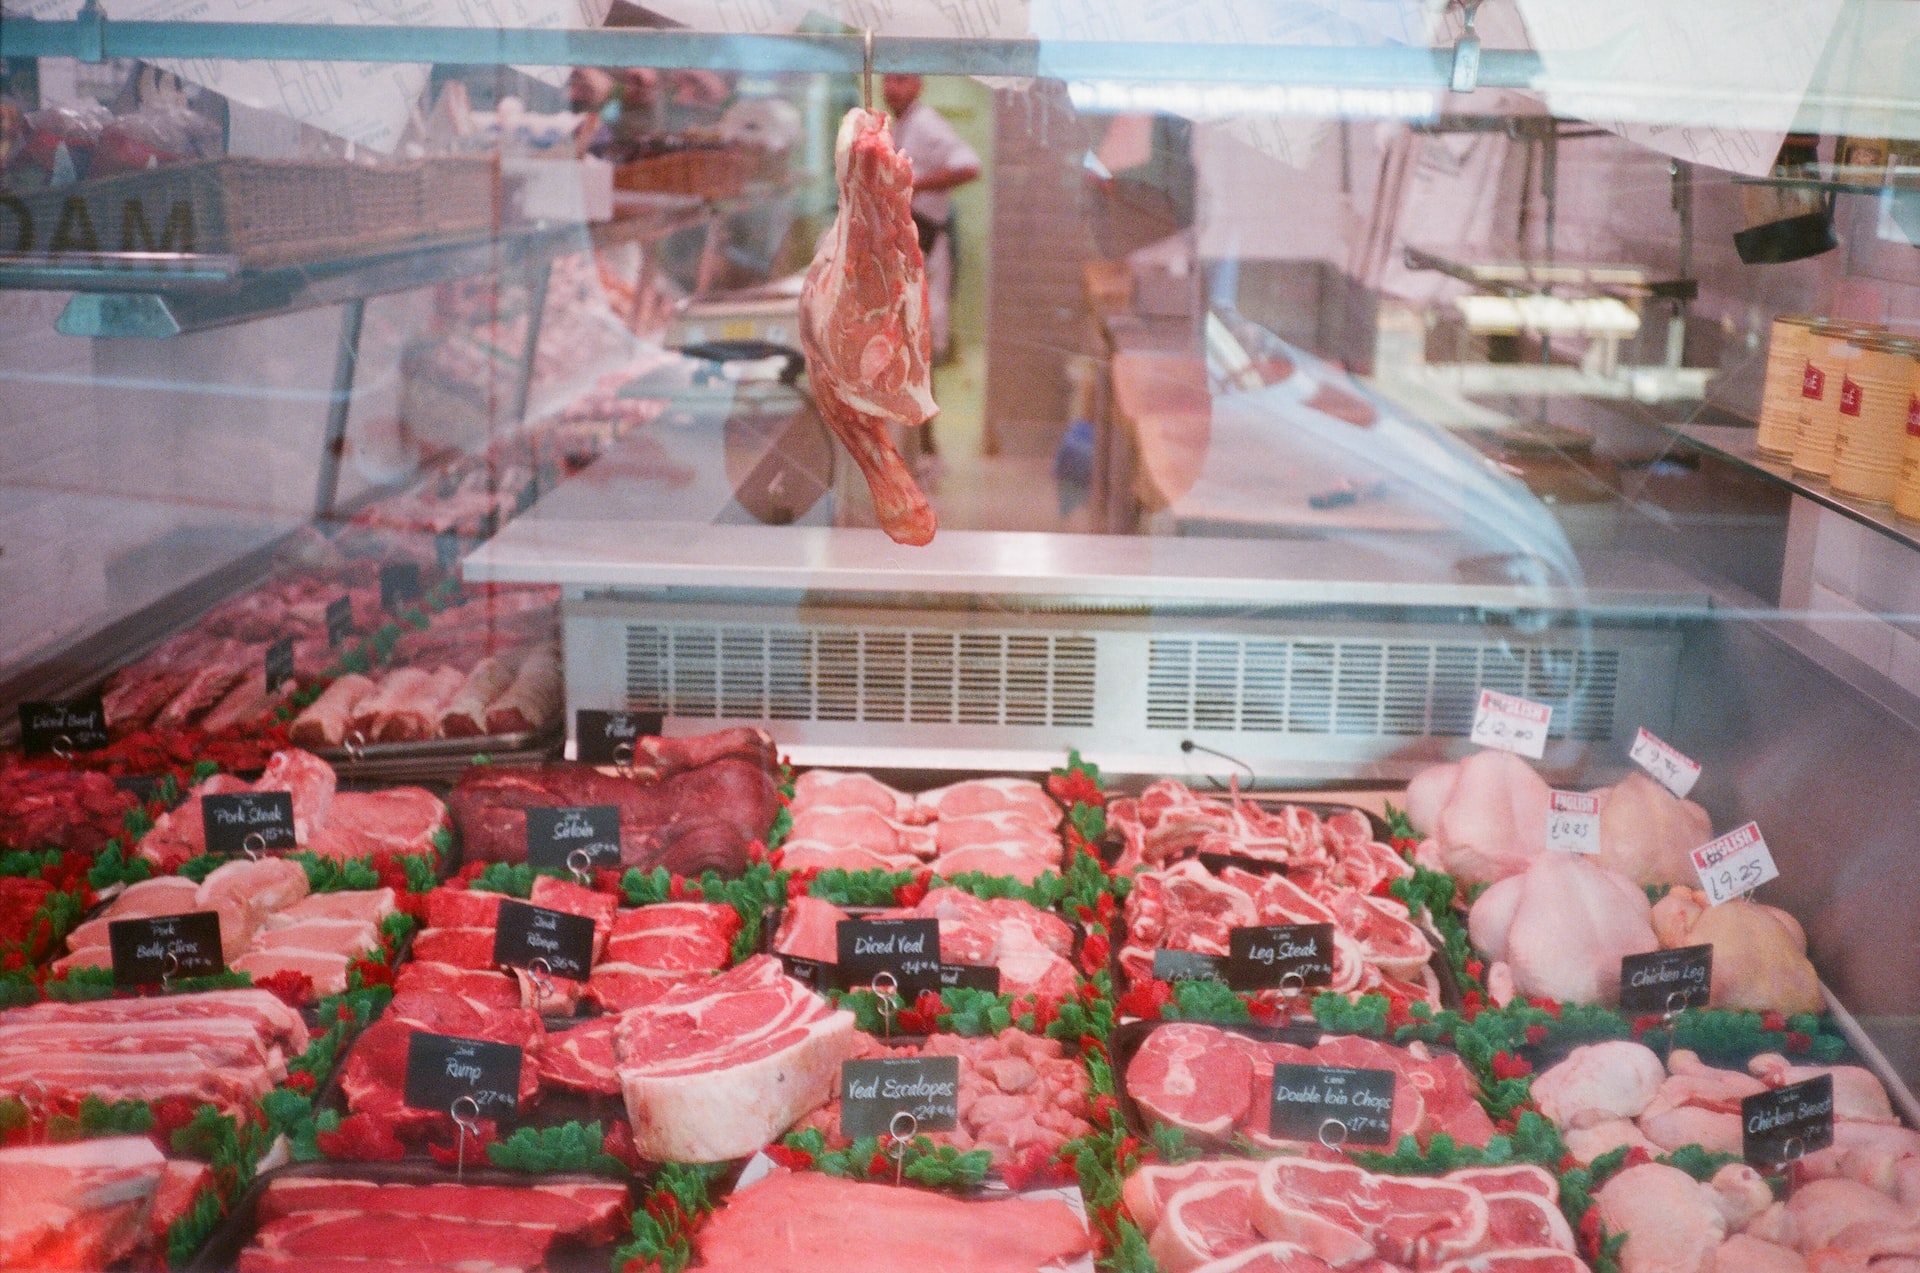 Red meat in store butcher shop